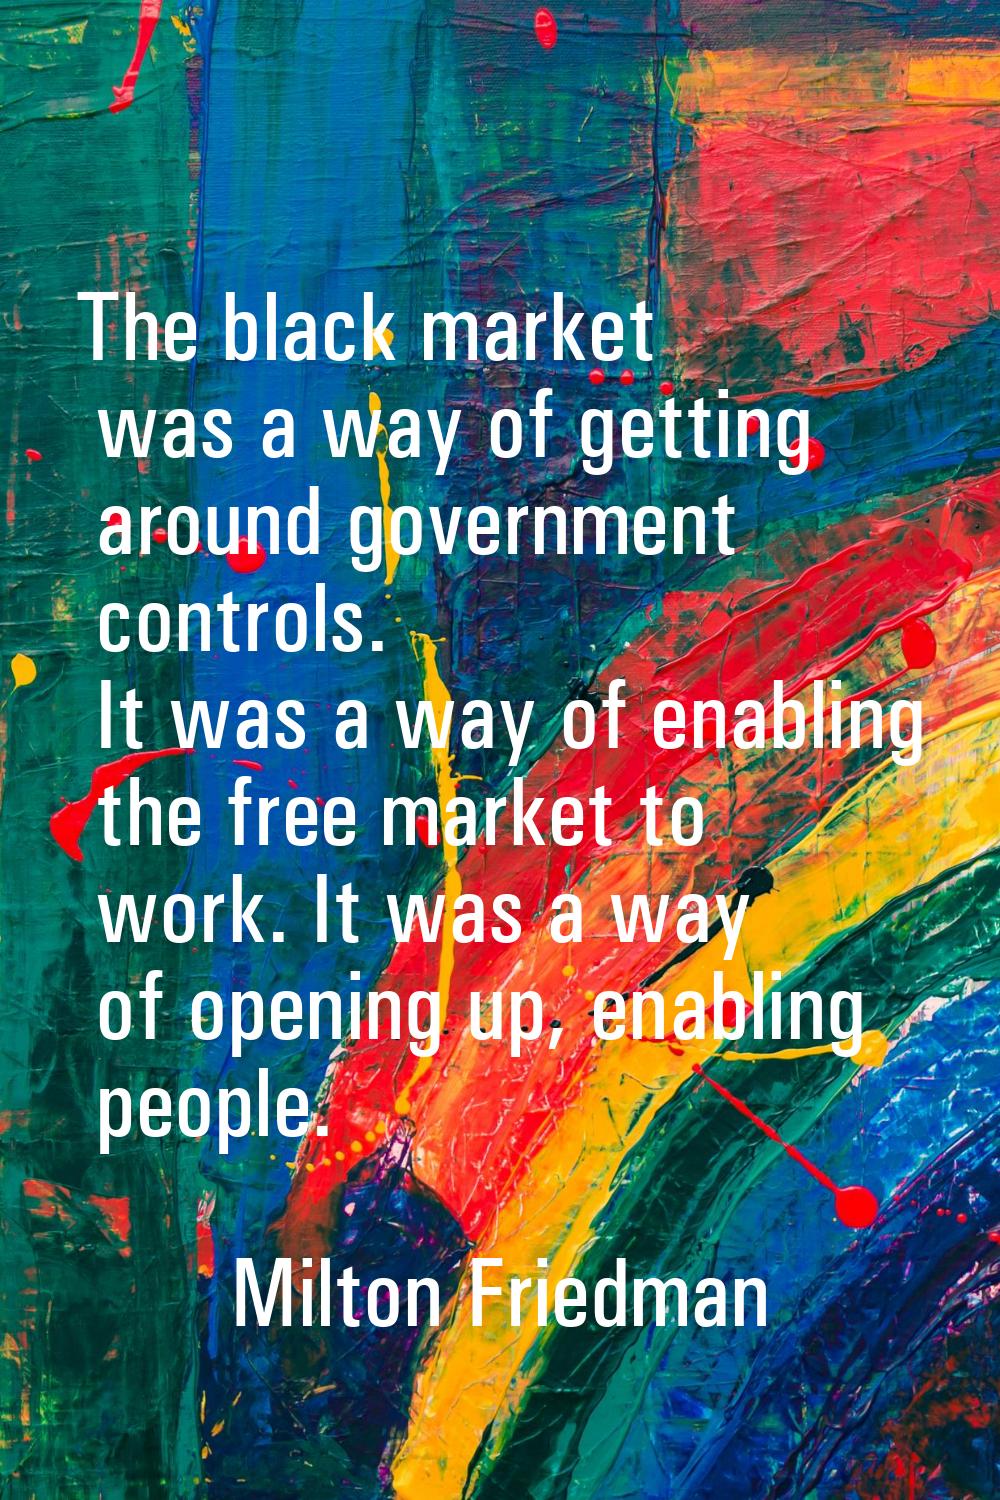 The black market was a way of getting around government controls. It was a way of enabling the free